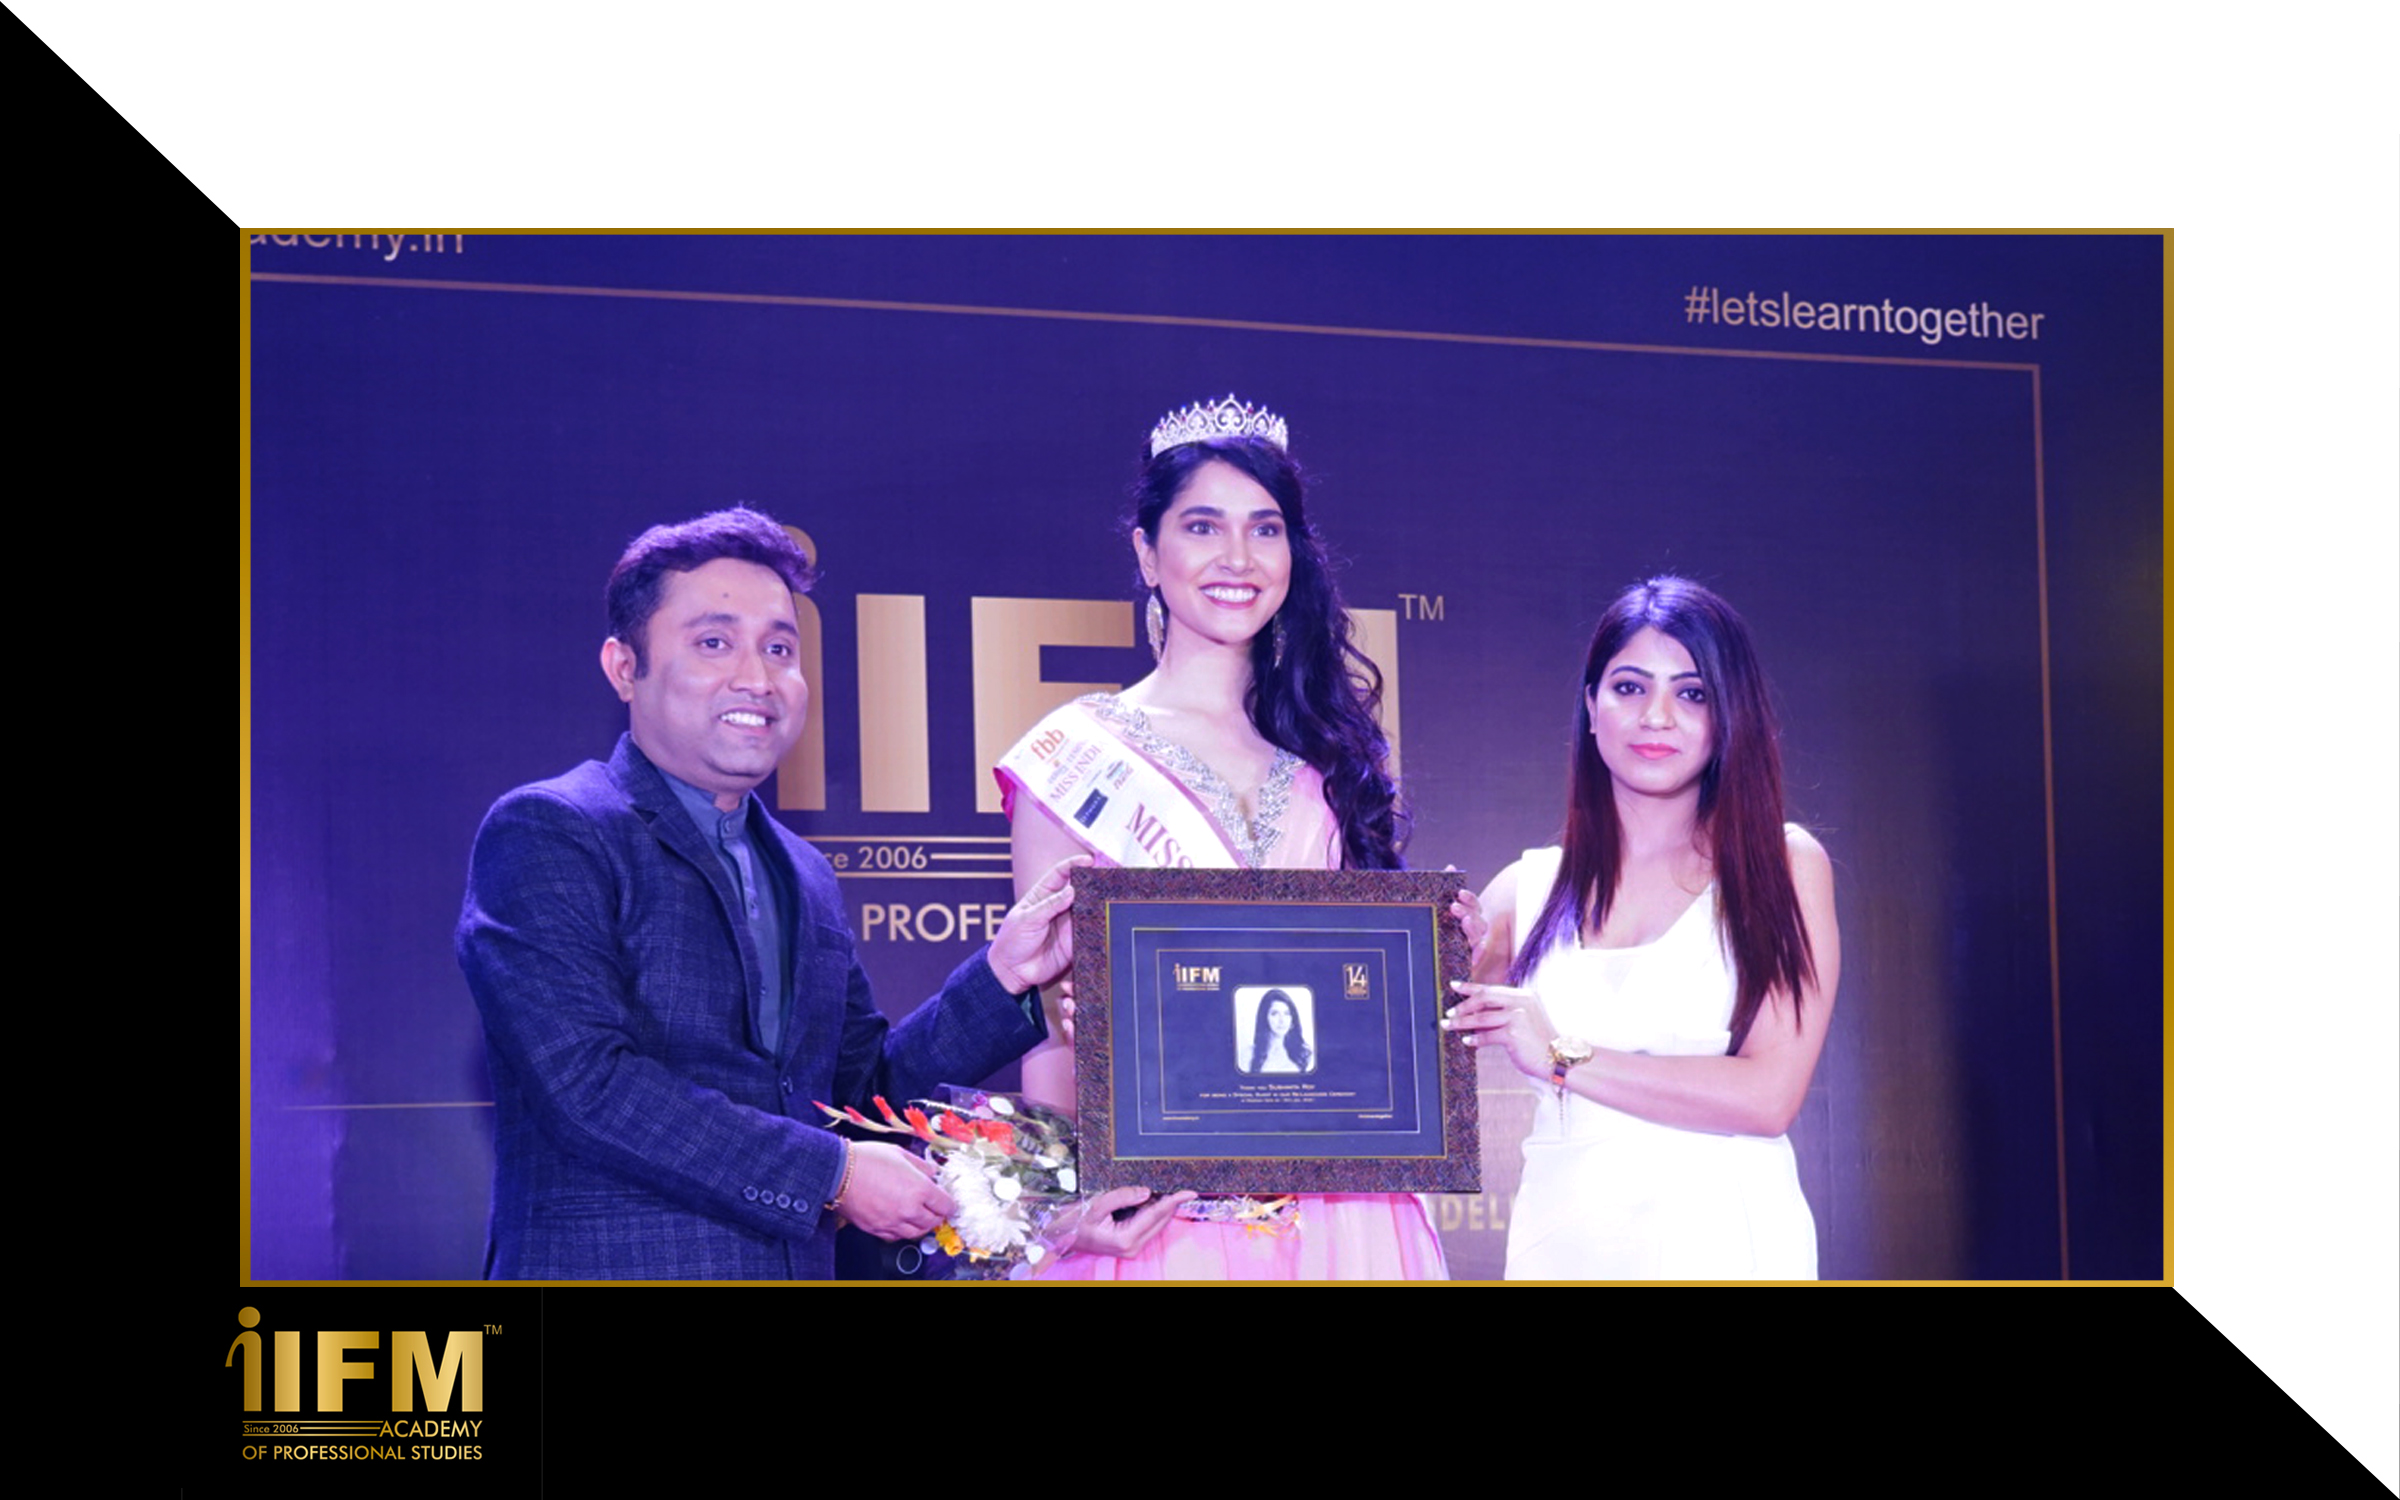 Femina Miss. India Westbengal 2019 Sushmita Roy along with our CEO Kuntanil Das & our Director Suvag